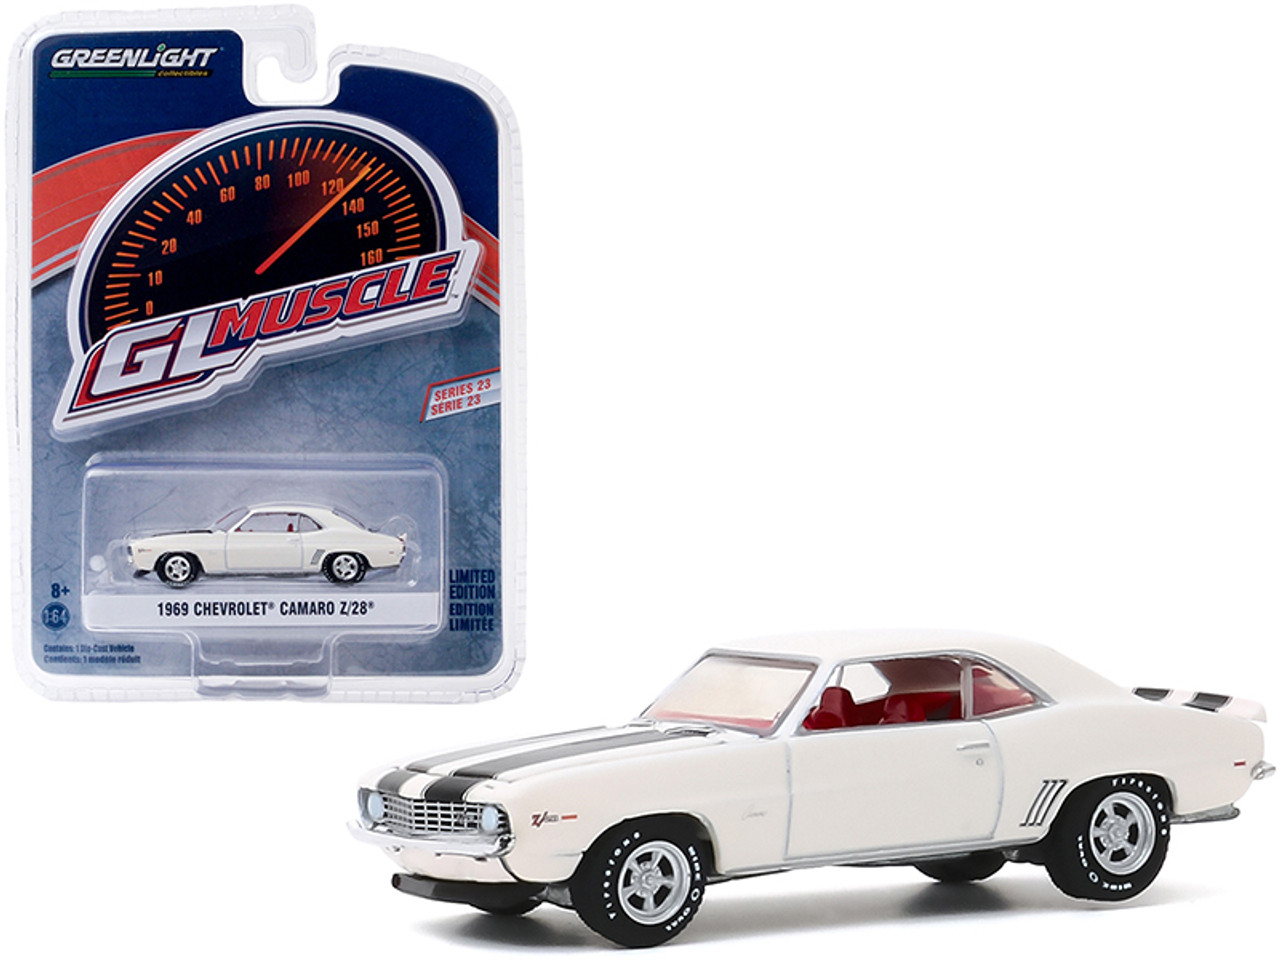 1969 Chevrolet Camaro Z/28 Dover White with Black Stripes and Red Interior "Greenlight Muscle" Series 23 1/64 Diecast Model Car by Greenlight